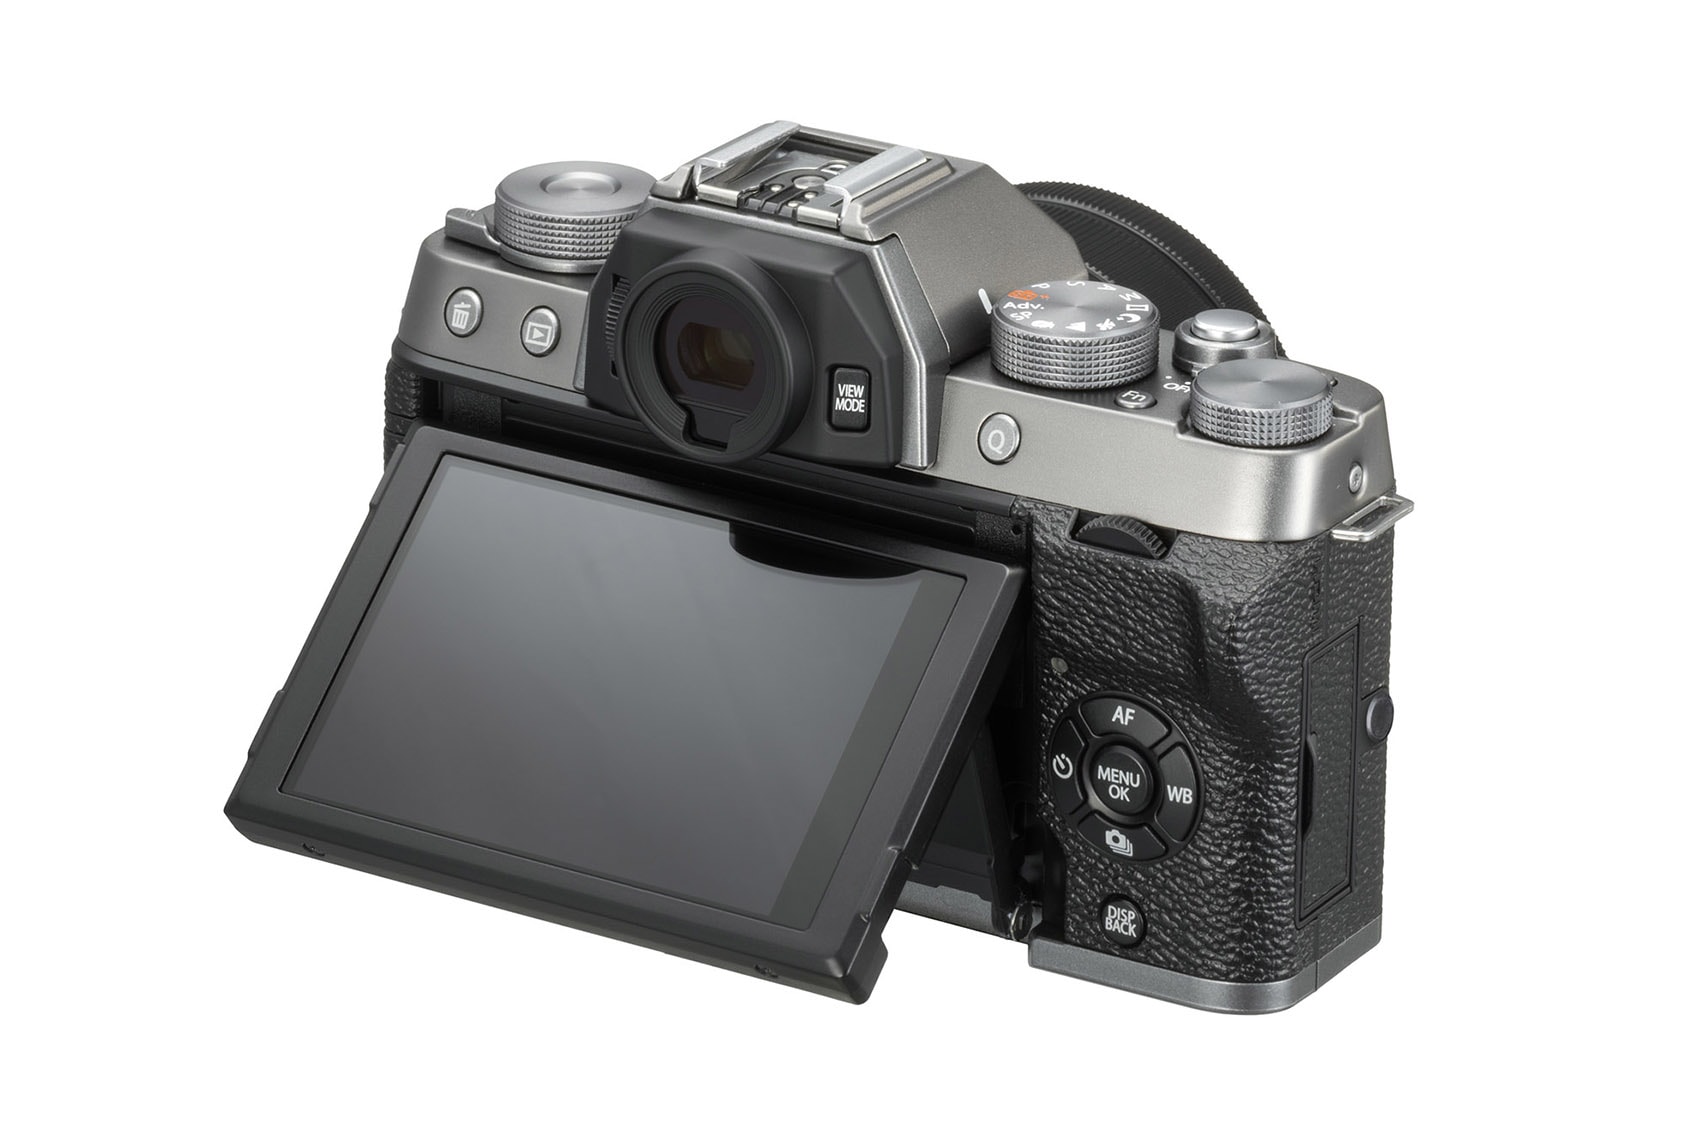 Fujifilm X-T100 Mirrorless Camera Details Availability To Buy Pricing Instax Polaroid Finepix Digital Instant New Compact